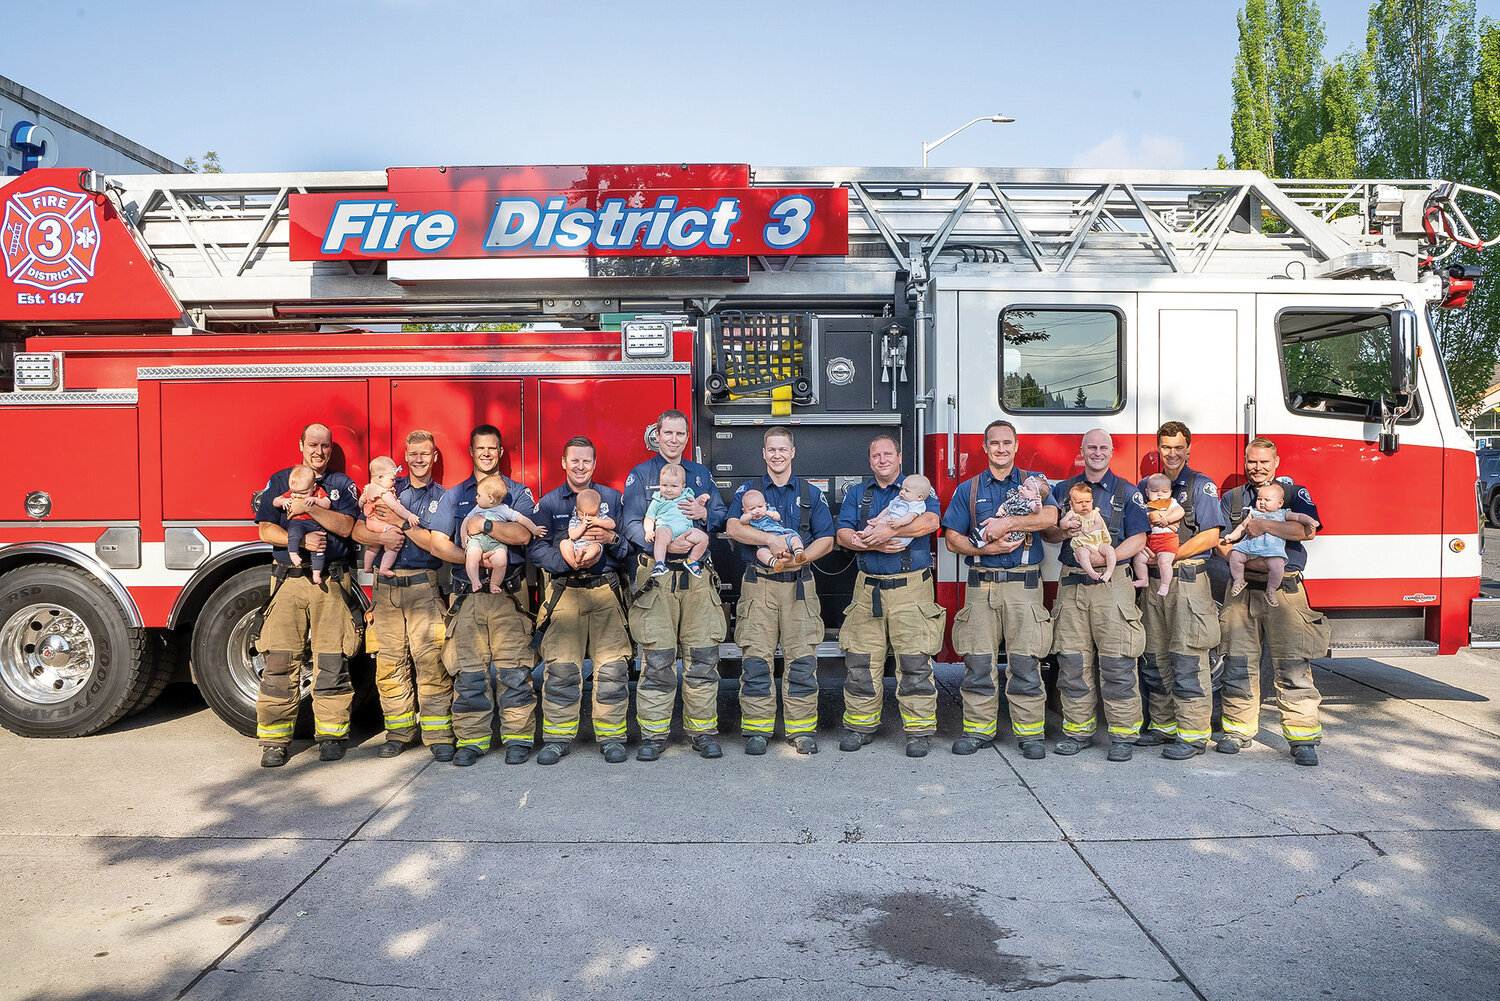 Thirteen Fire District No 3 firefighters stand with their babies who have been born since last November at Station 35 in Battle Ground.